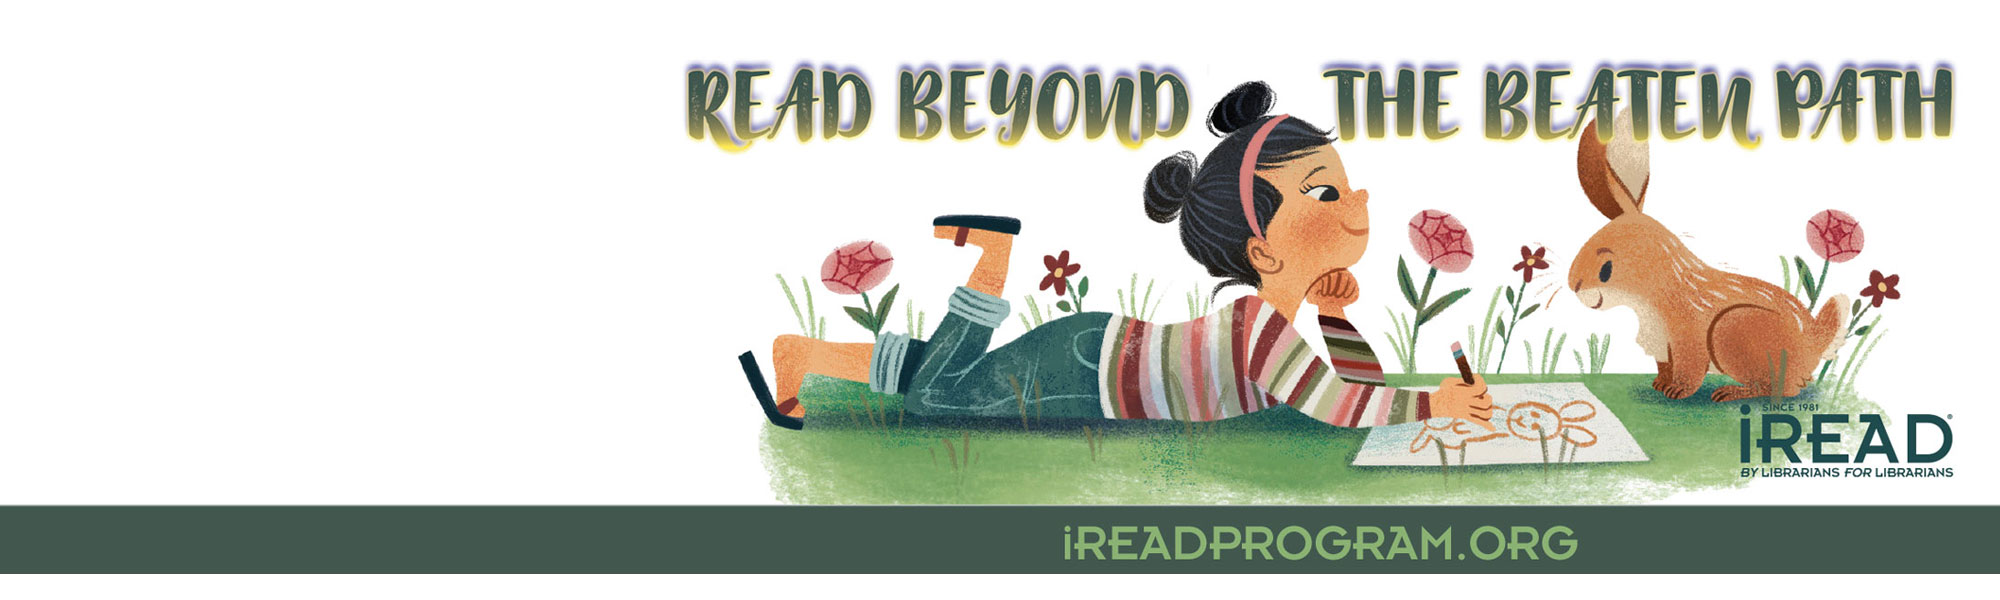 Read Beyond the Beaten Path - little girl drawing a picture while laying in a flower bed with a bunny